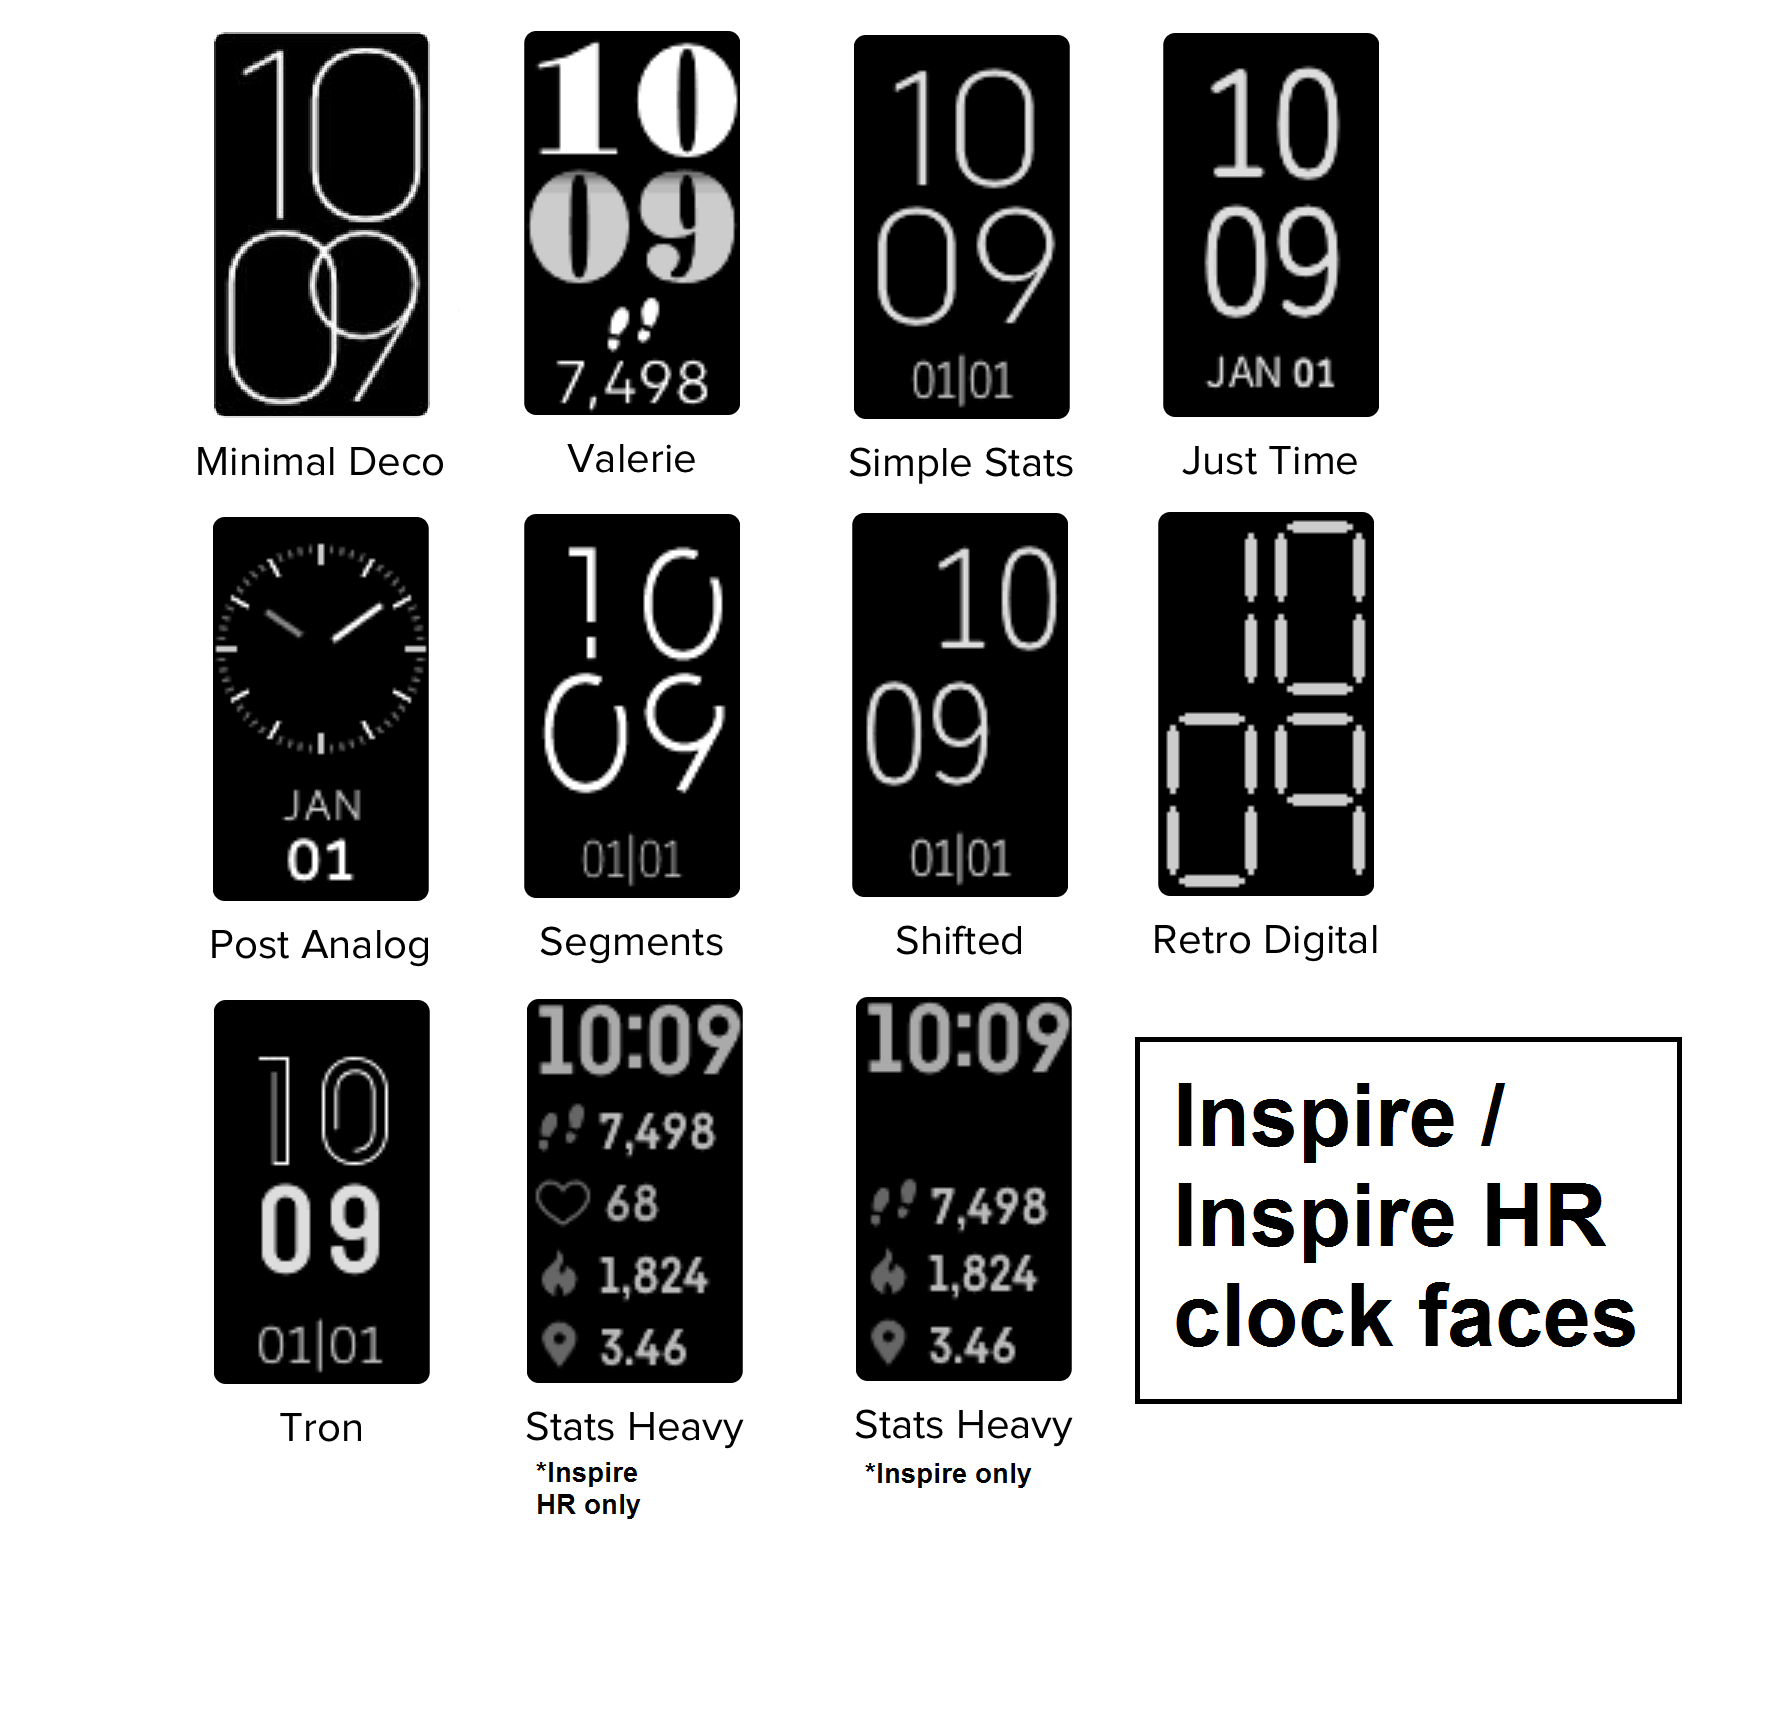 clockface showing heart rate on inspire 